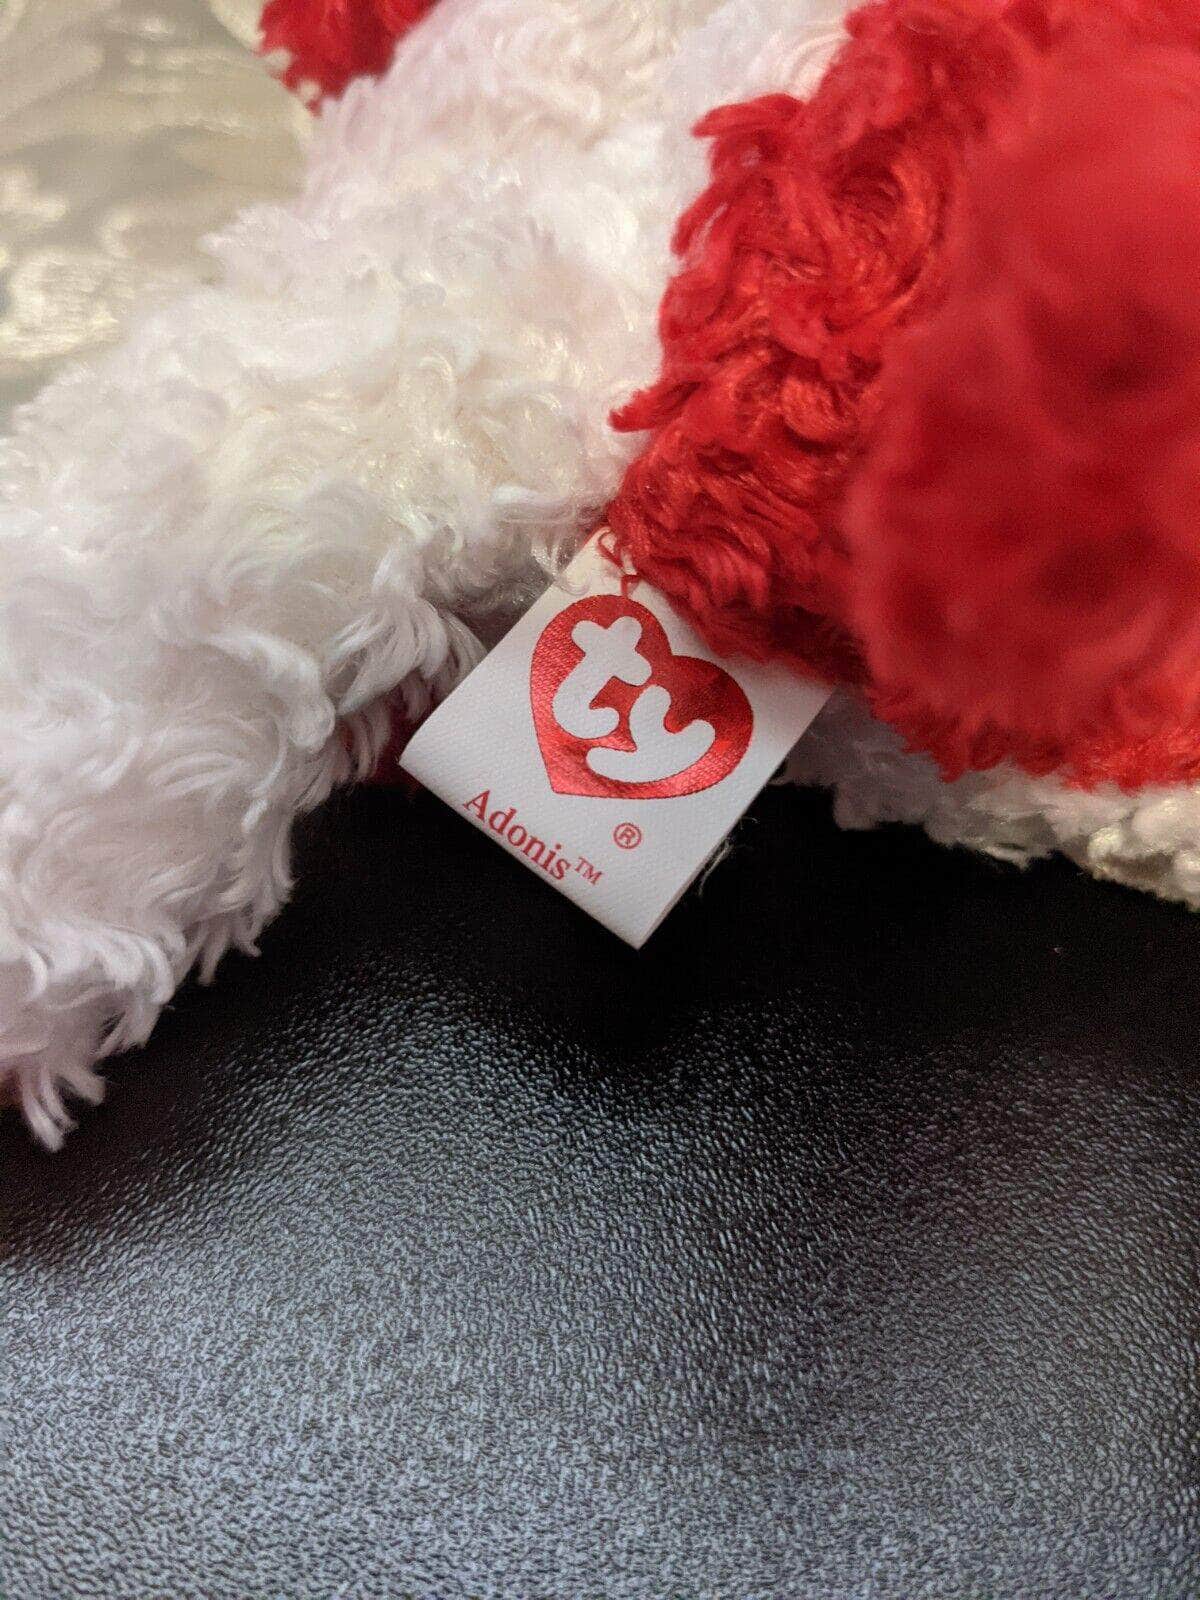 Ty Beanie Baby Of The Month - Adonis The Valentine's Day Dog - February 2005 - Vintage Beanies Canada